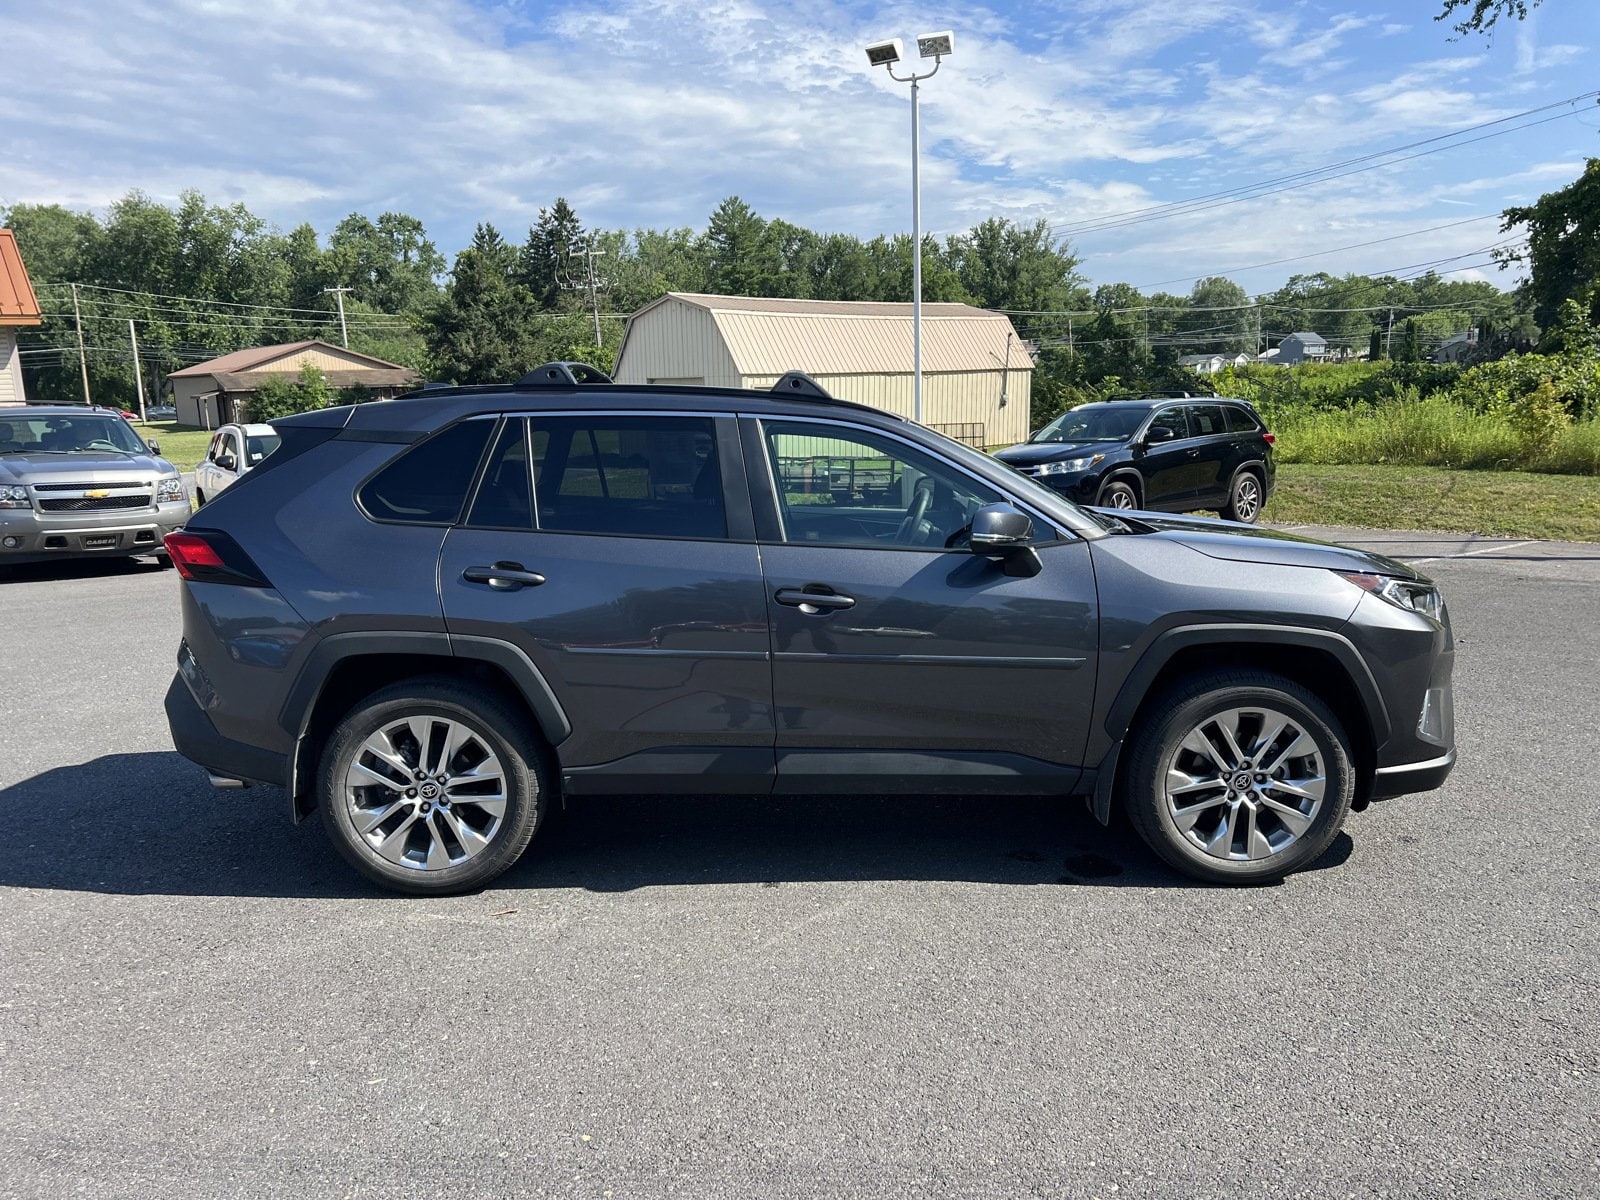 Used 2021 Toyota RAV4 XLE Premium with VIN 2T3A1RFV2MC240713 for sale in Selinsgrove, PA